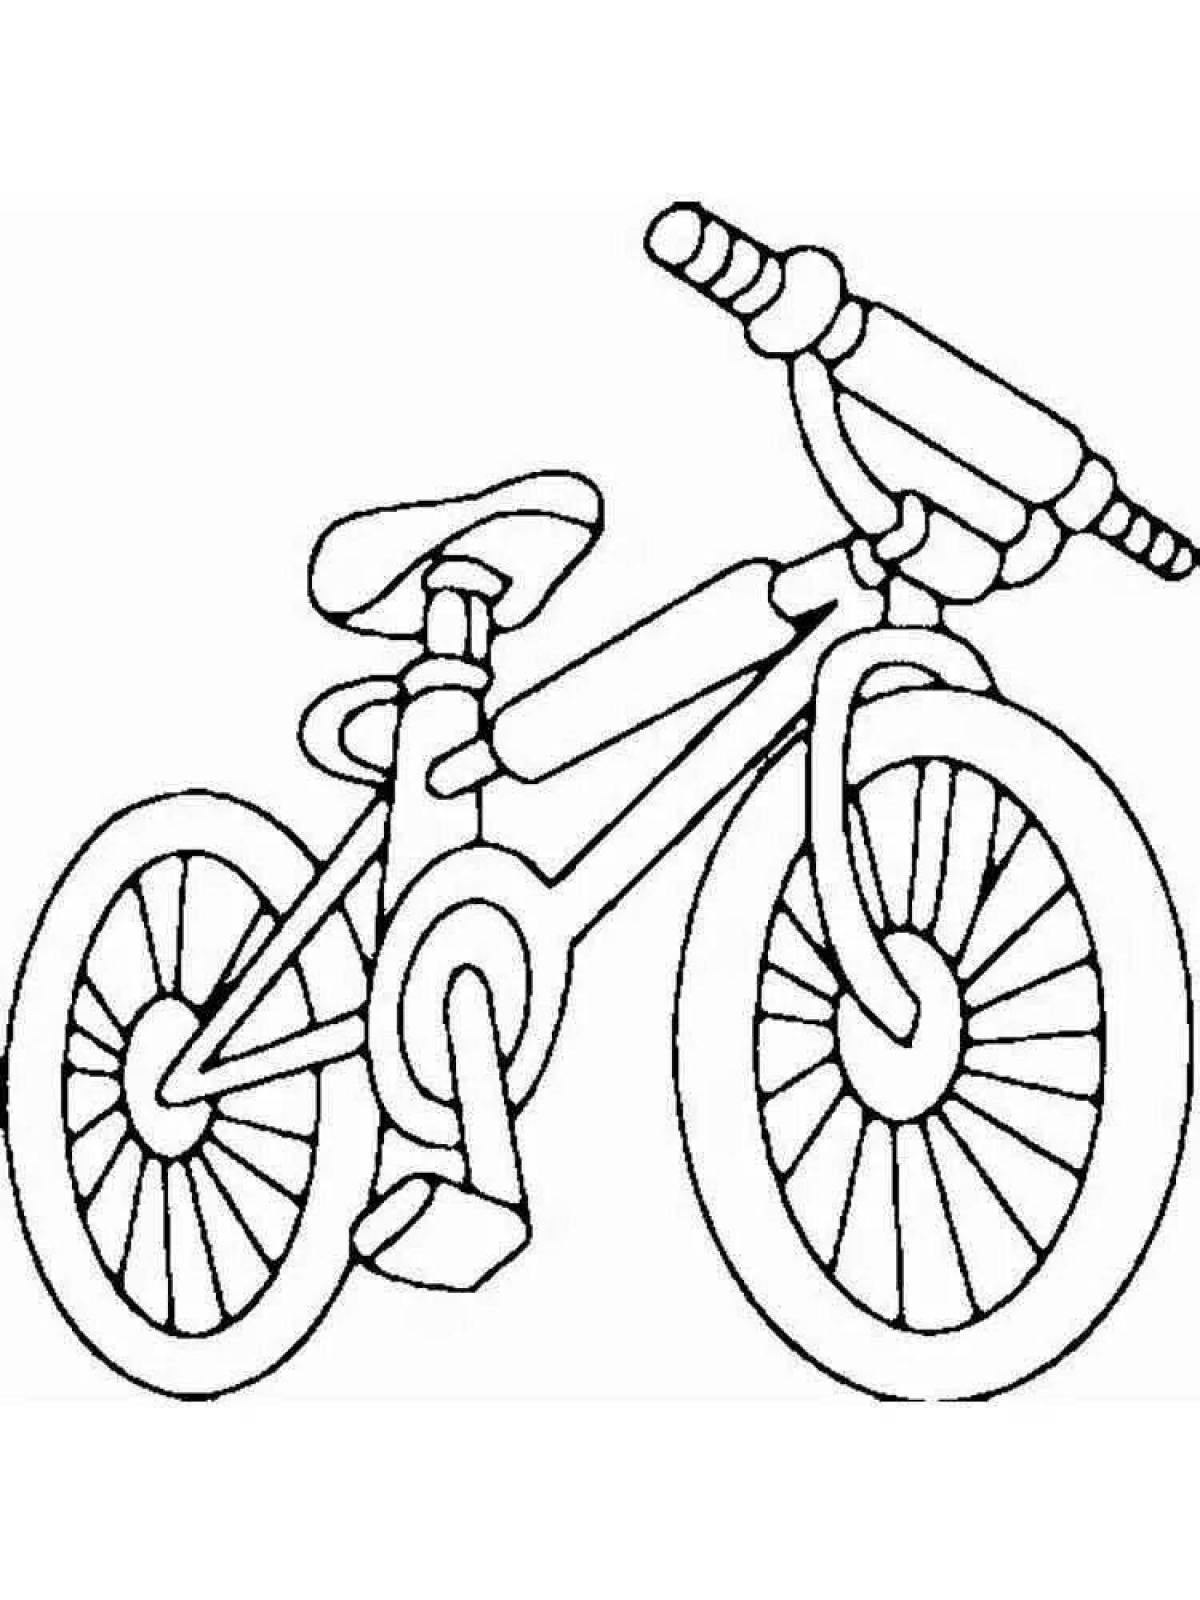 Colorful bike coloring for kids